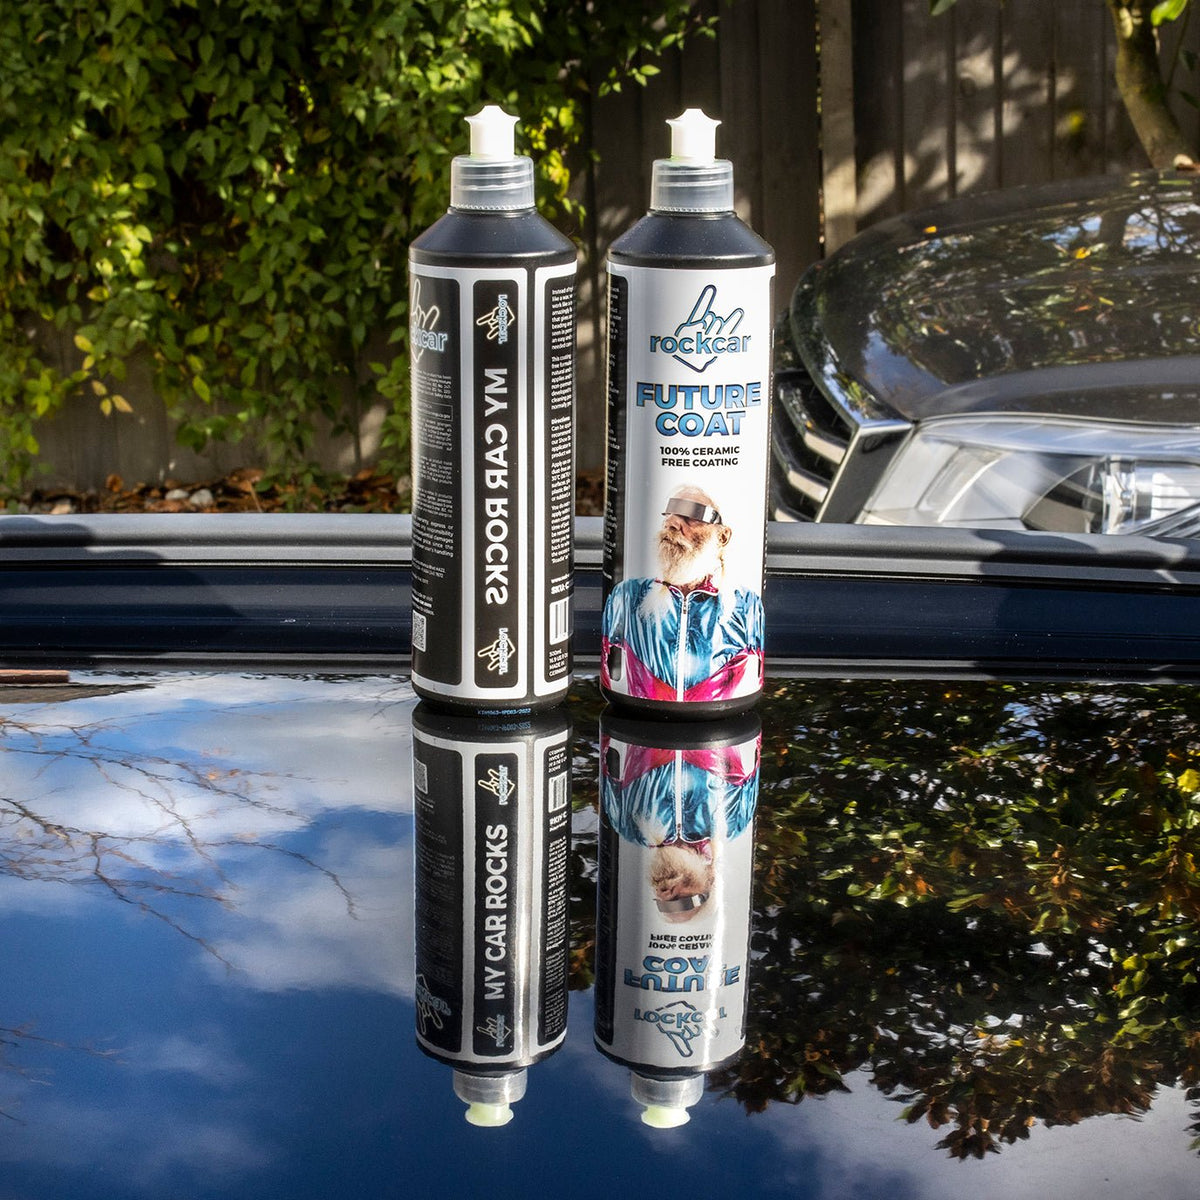 Adam's Hand Polish Paint Revive | Ultimate Top Coat Polish & Glaze Infused  with Polymer Protection Wax Sealant | Correct, Finish, & Protect New Mirror